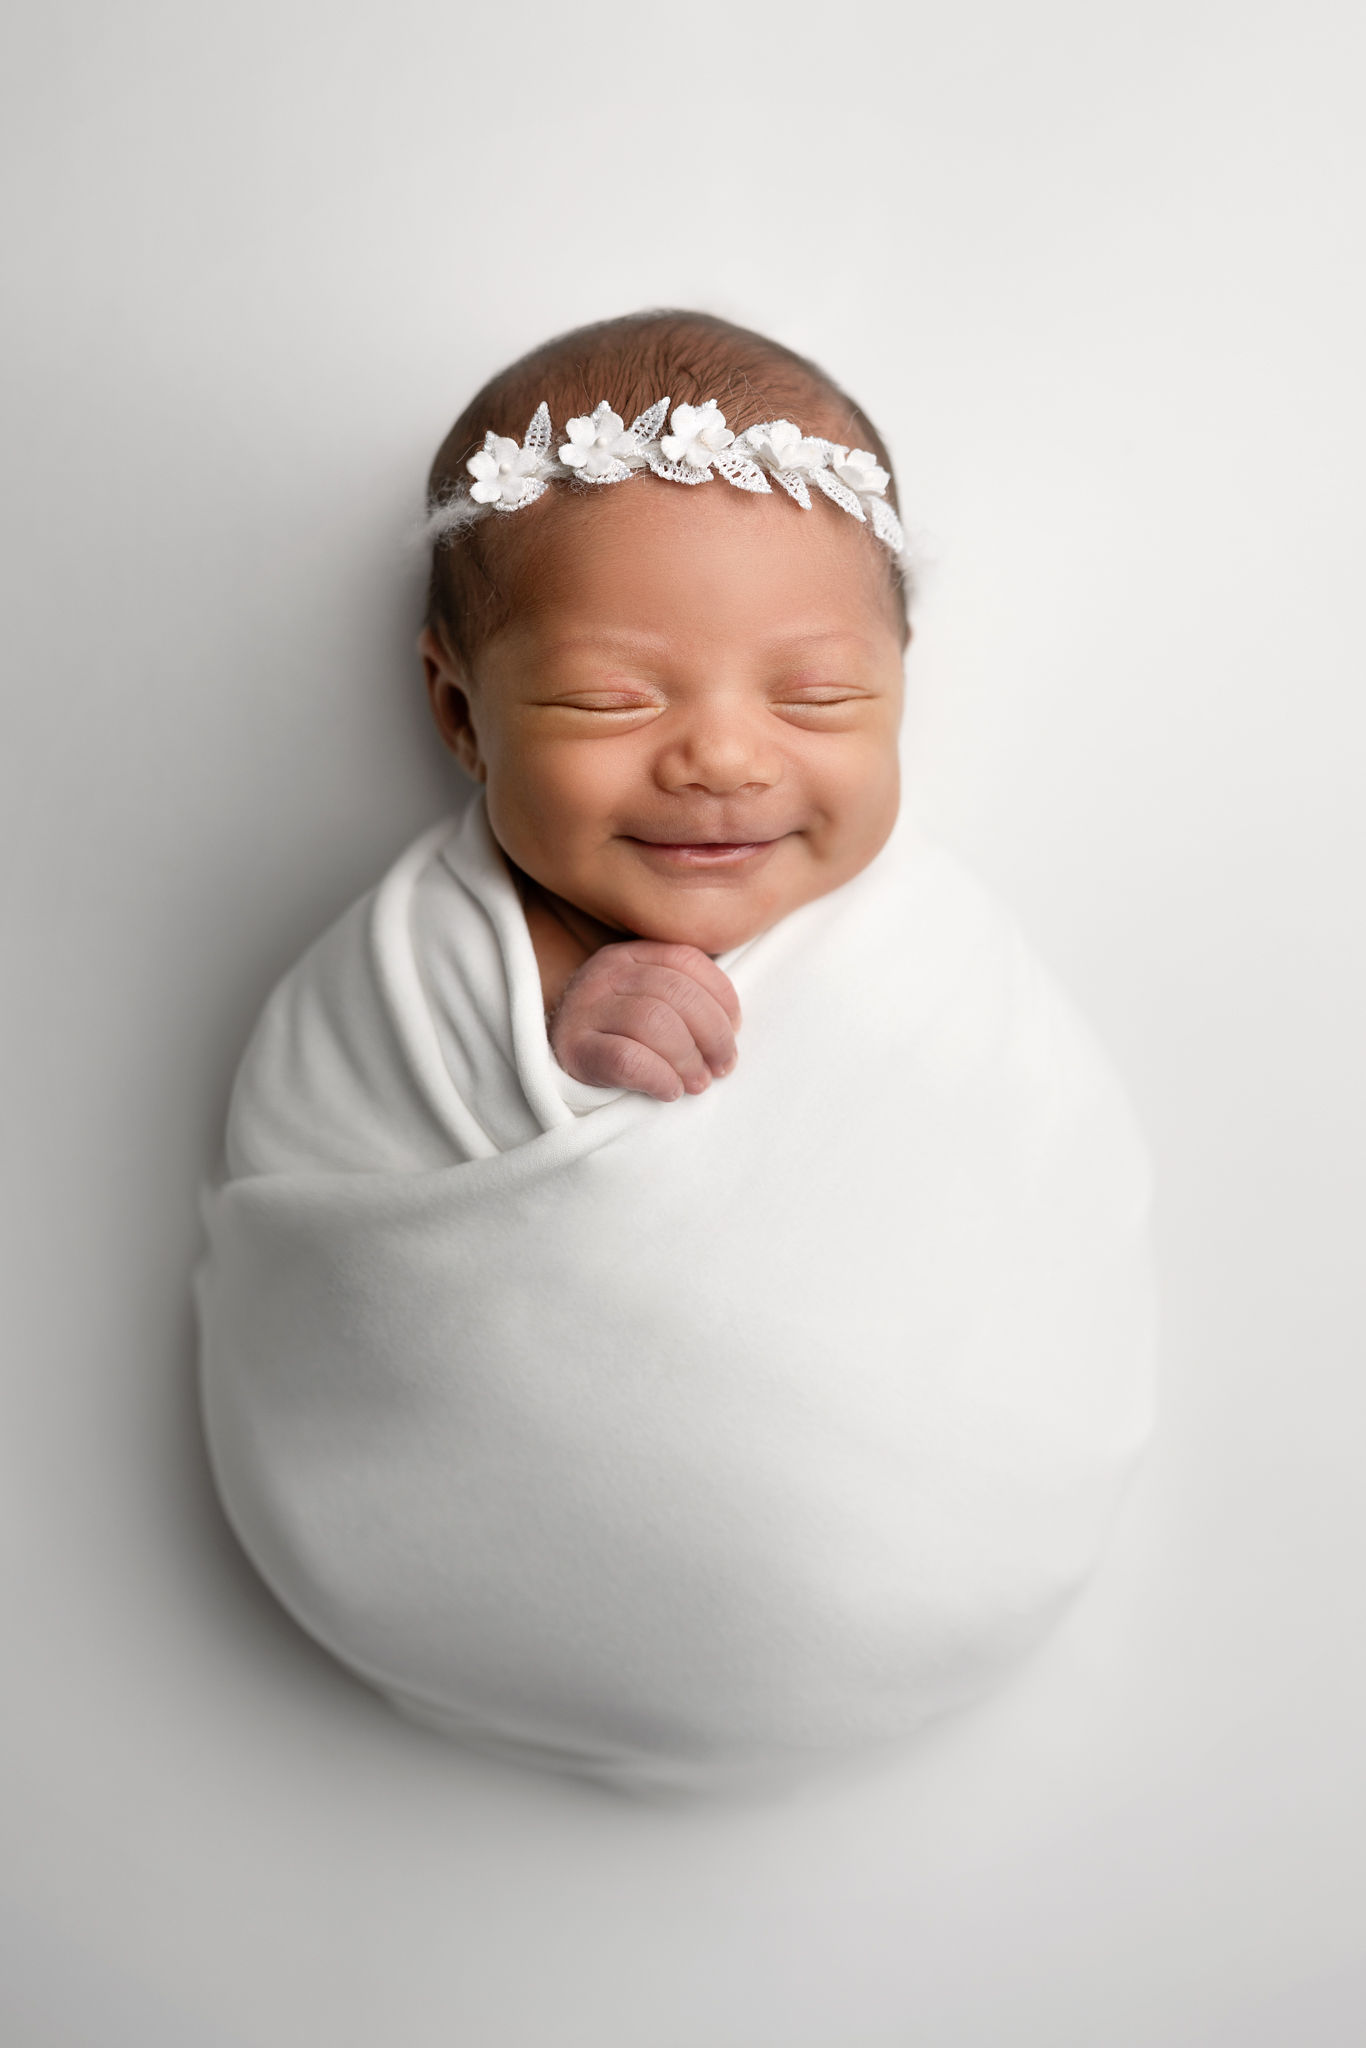 A smiling newborn baby sleeps in a white swaddle